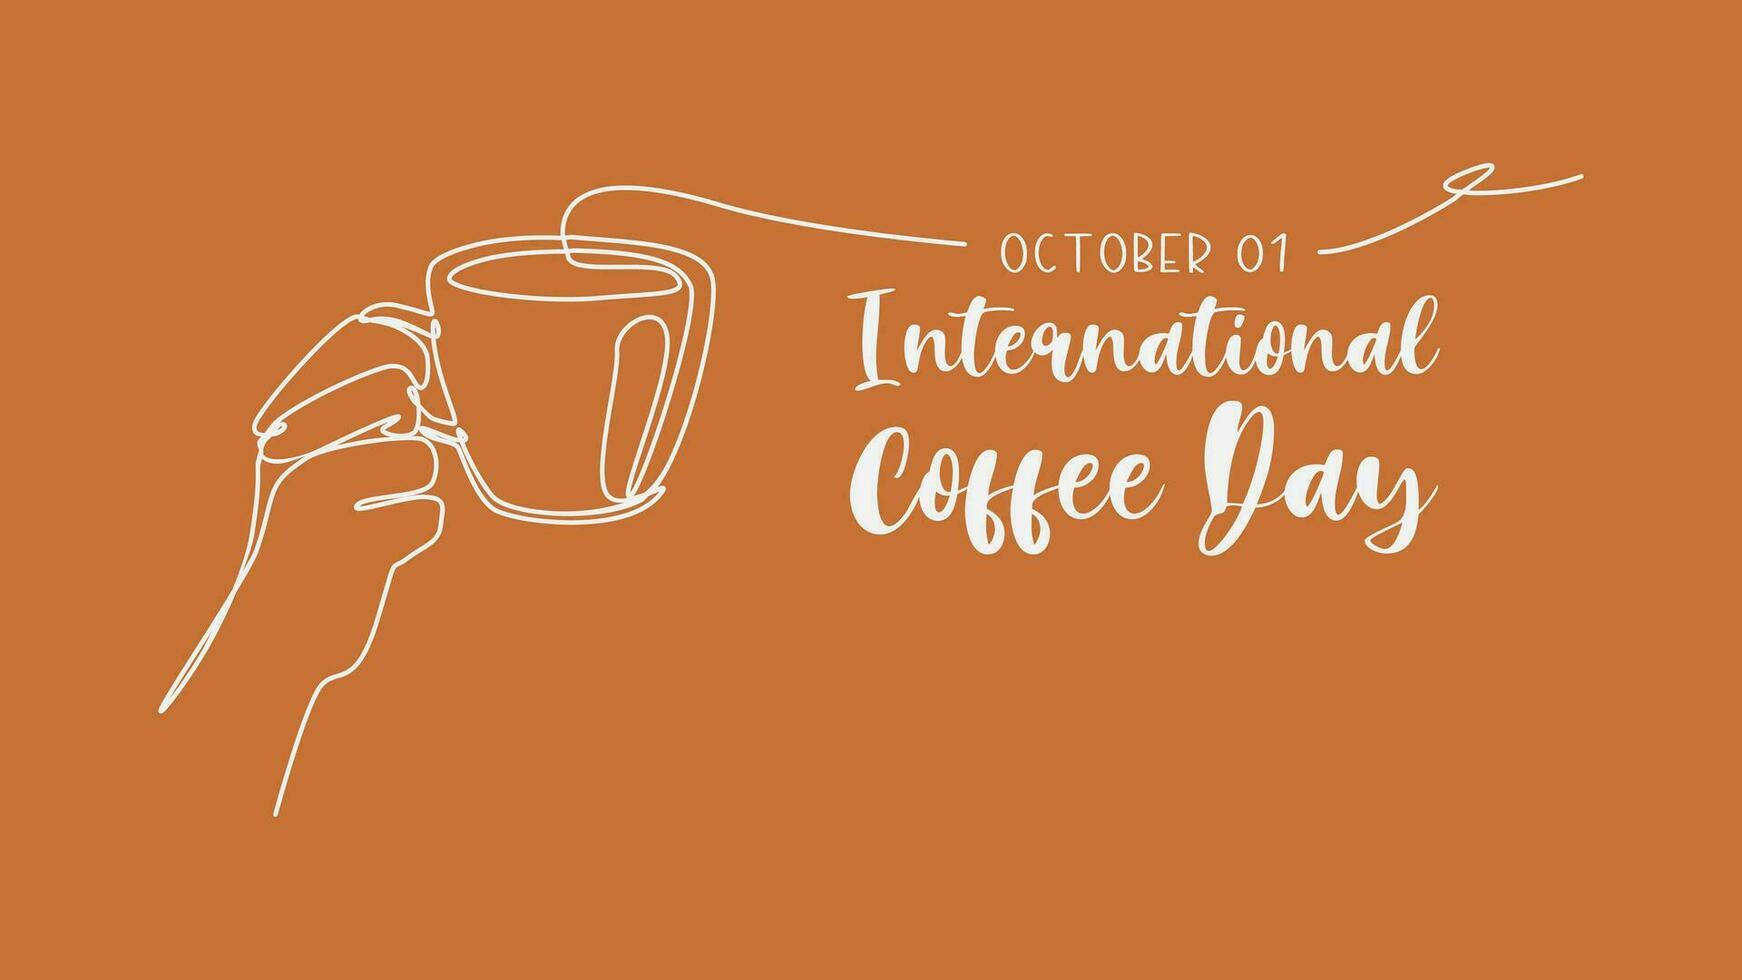 international coffee day background design with illustration of hand holding coffee. one continuous line drawing style. vector graphic.